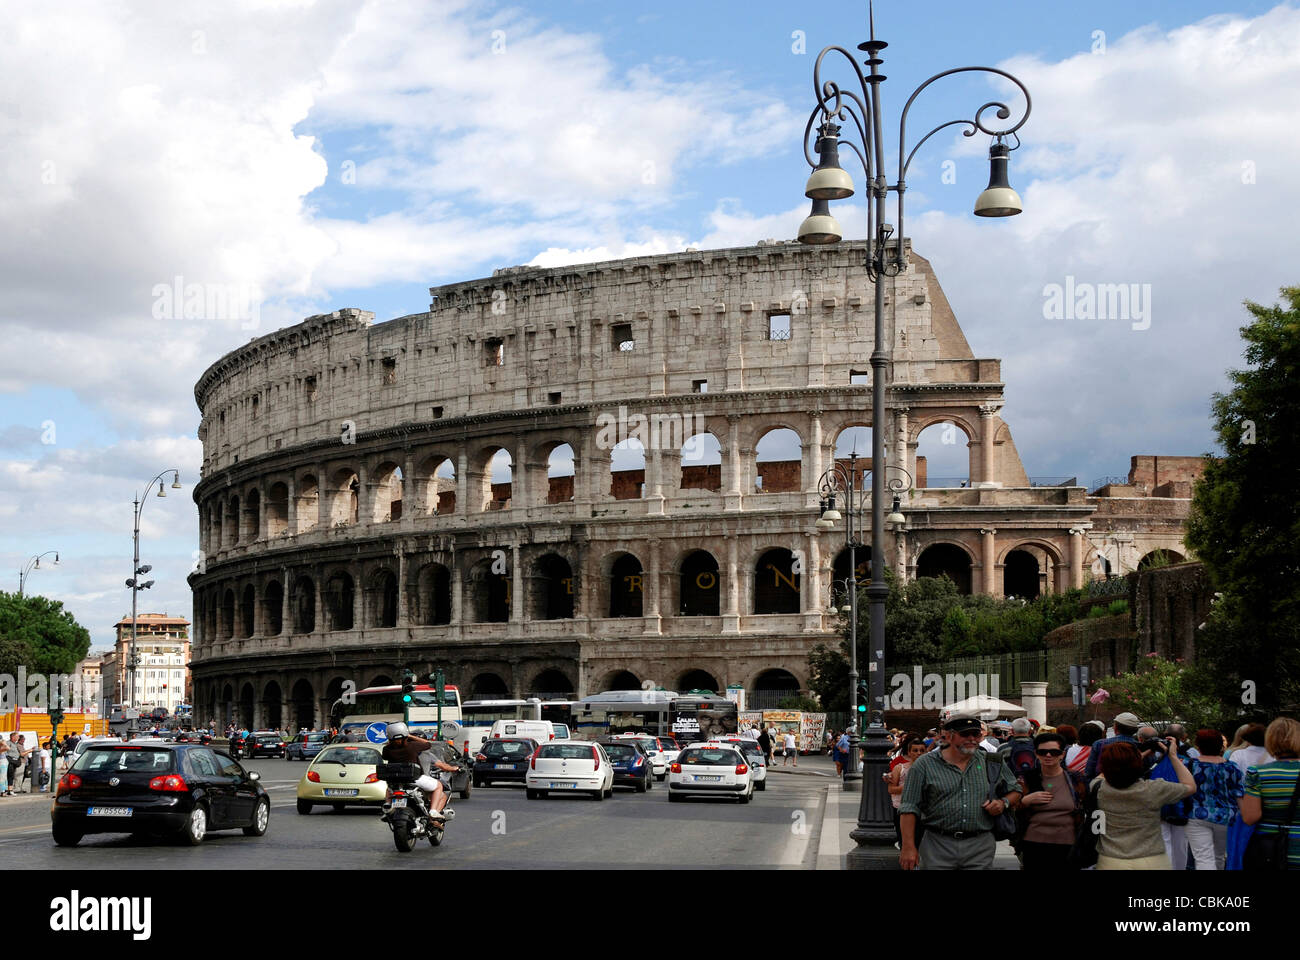 Colosseum at the Piazza del Colosseo in Rome. Stock Photo